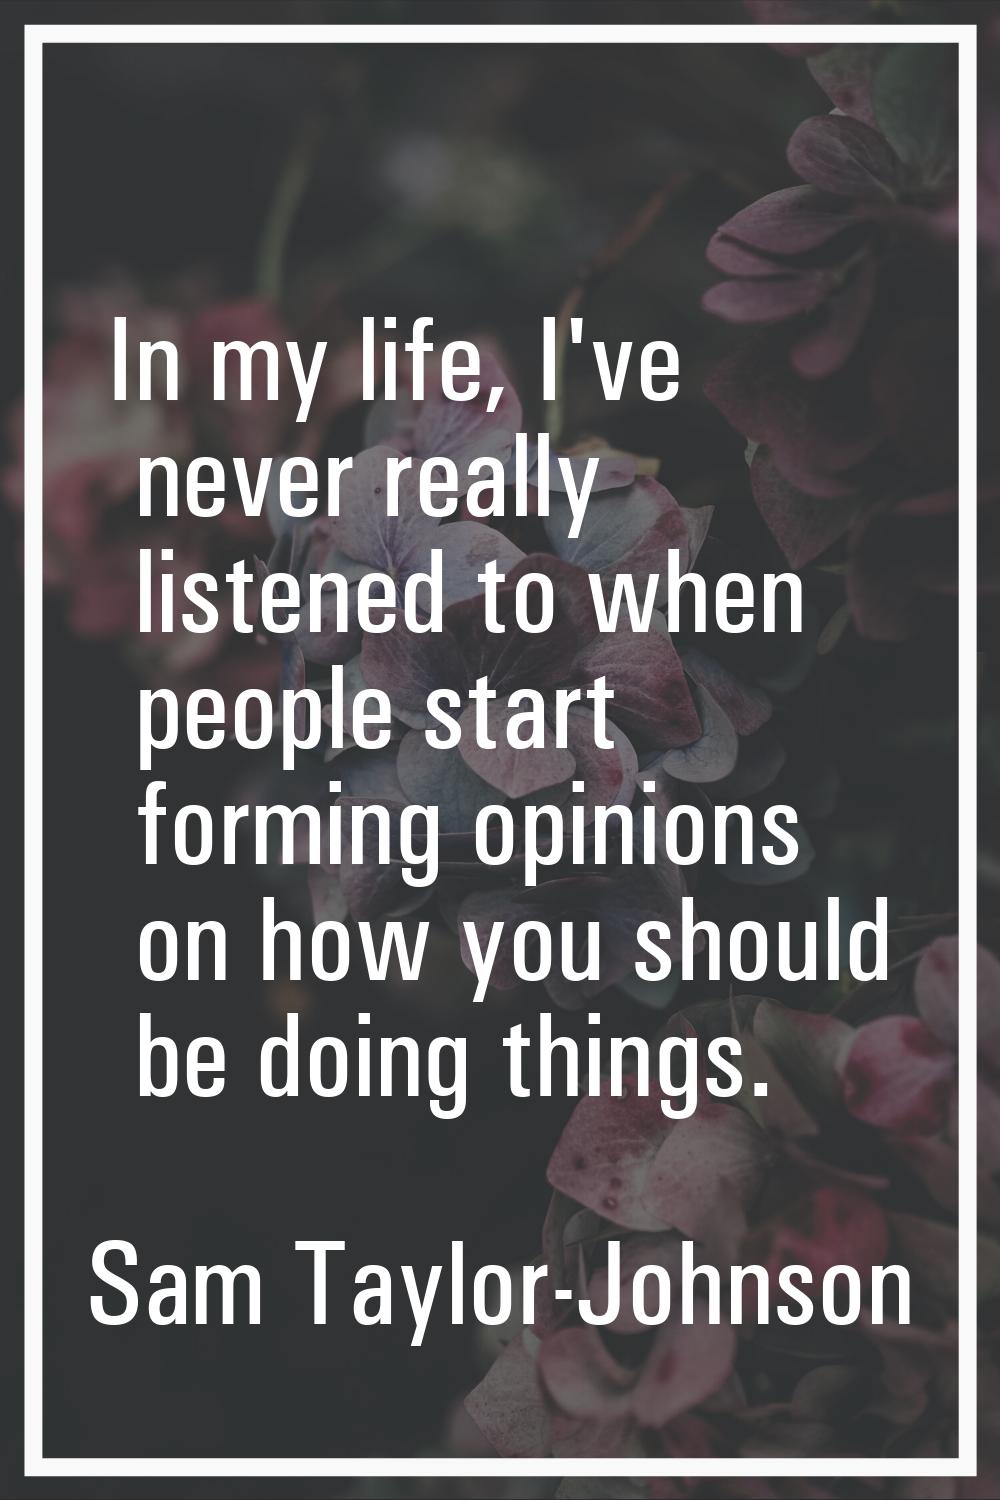 In my life, I've never really listened to when people start forming opinions on how you should be d